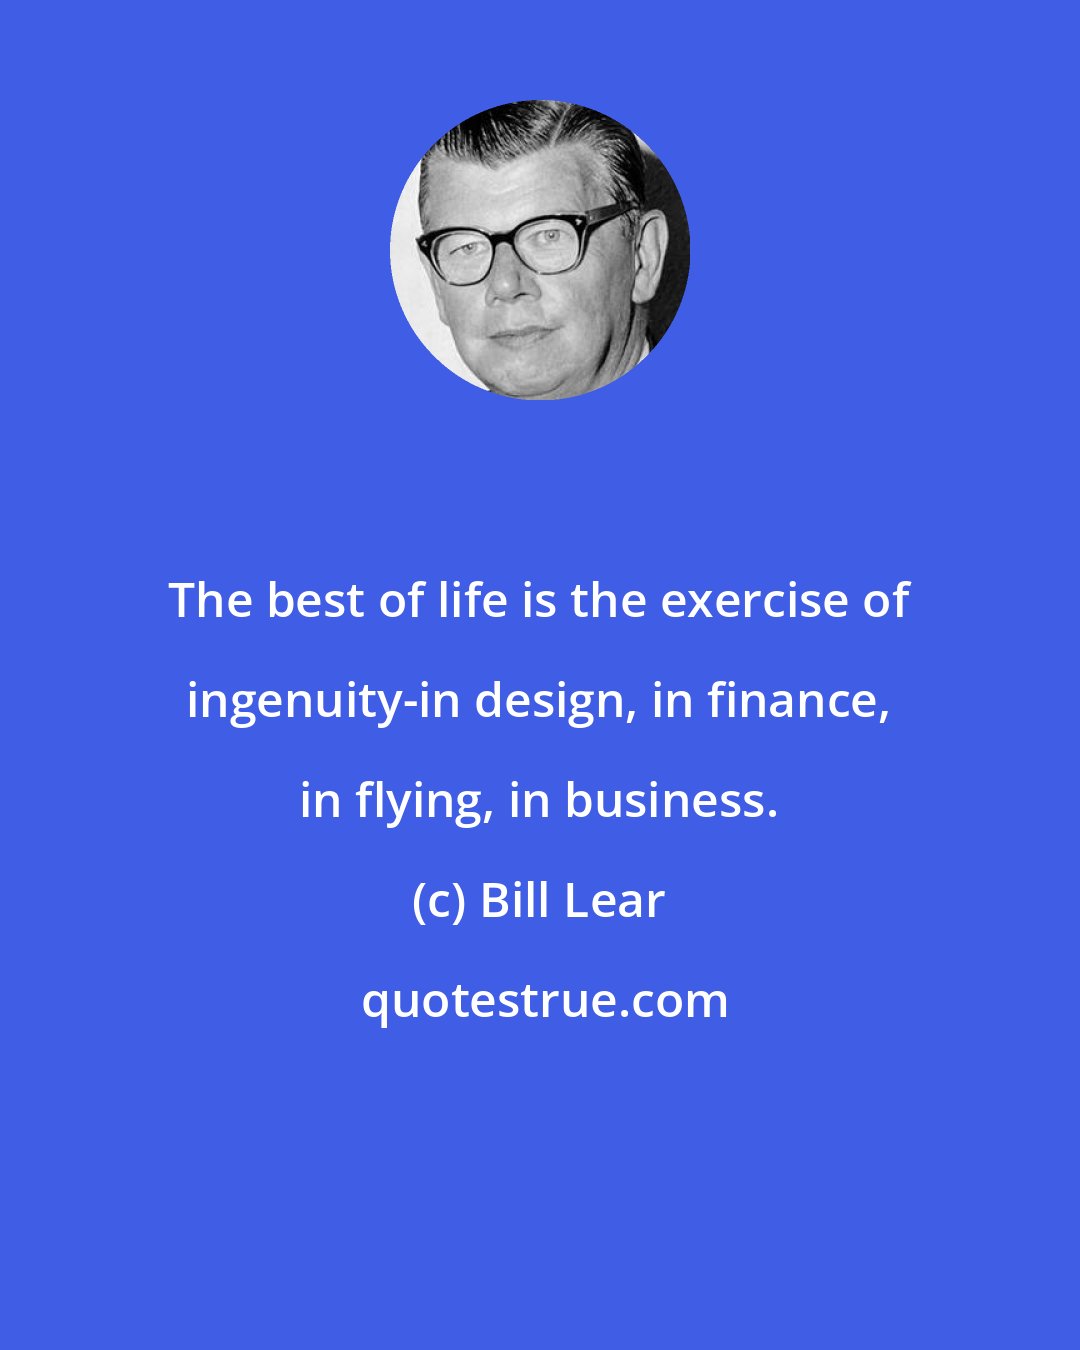 Bill Lear: The best of life is the exercise of ingenuity-in design, in finance, in flying, in business.